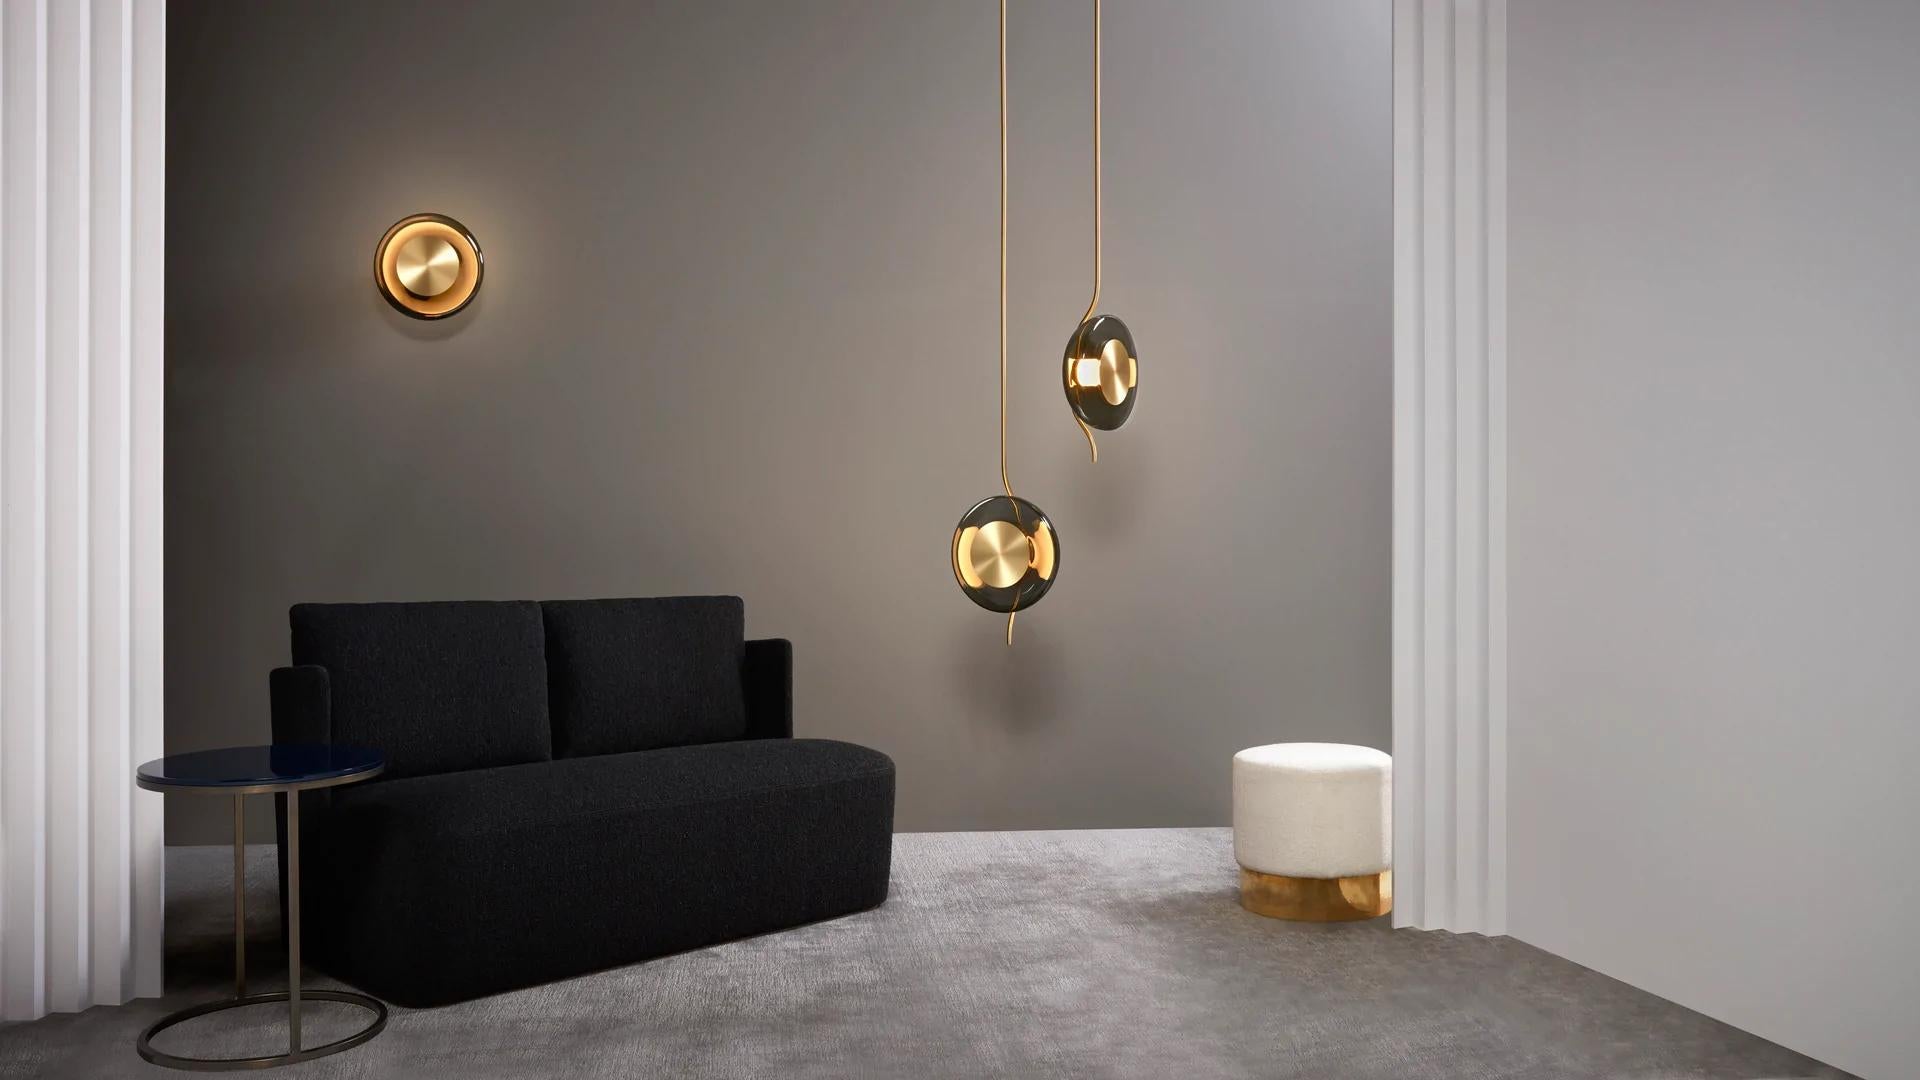 Pendulum pendant by CTO lighting.
Materials: satin brass with smoked glass shade.
Also available in bronze with smoked glass shade.
Dimensions: W 32 x D 15 x H 100 cm.

All our lamps can be wired according to each country. If sold to the USA it